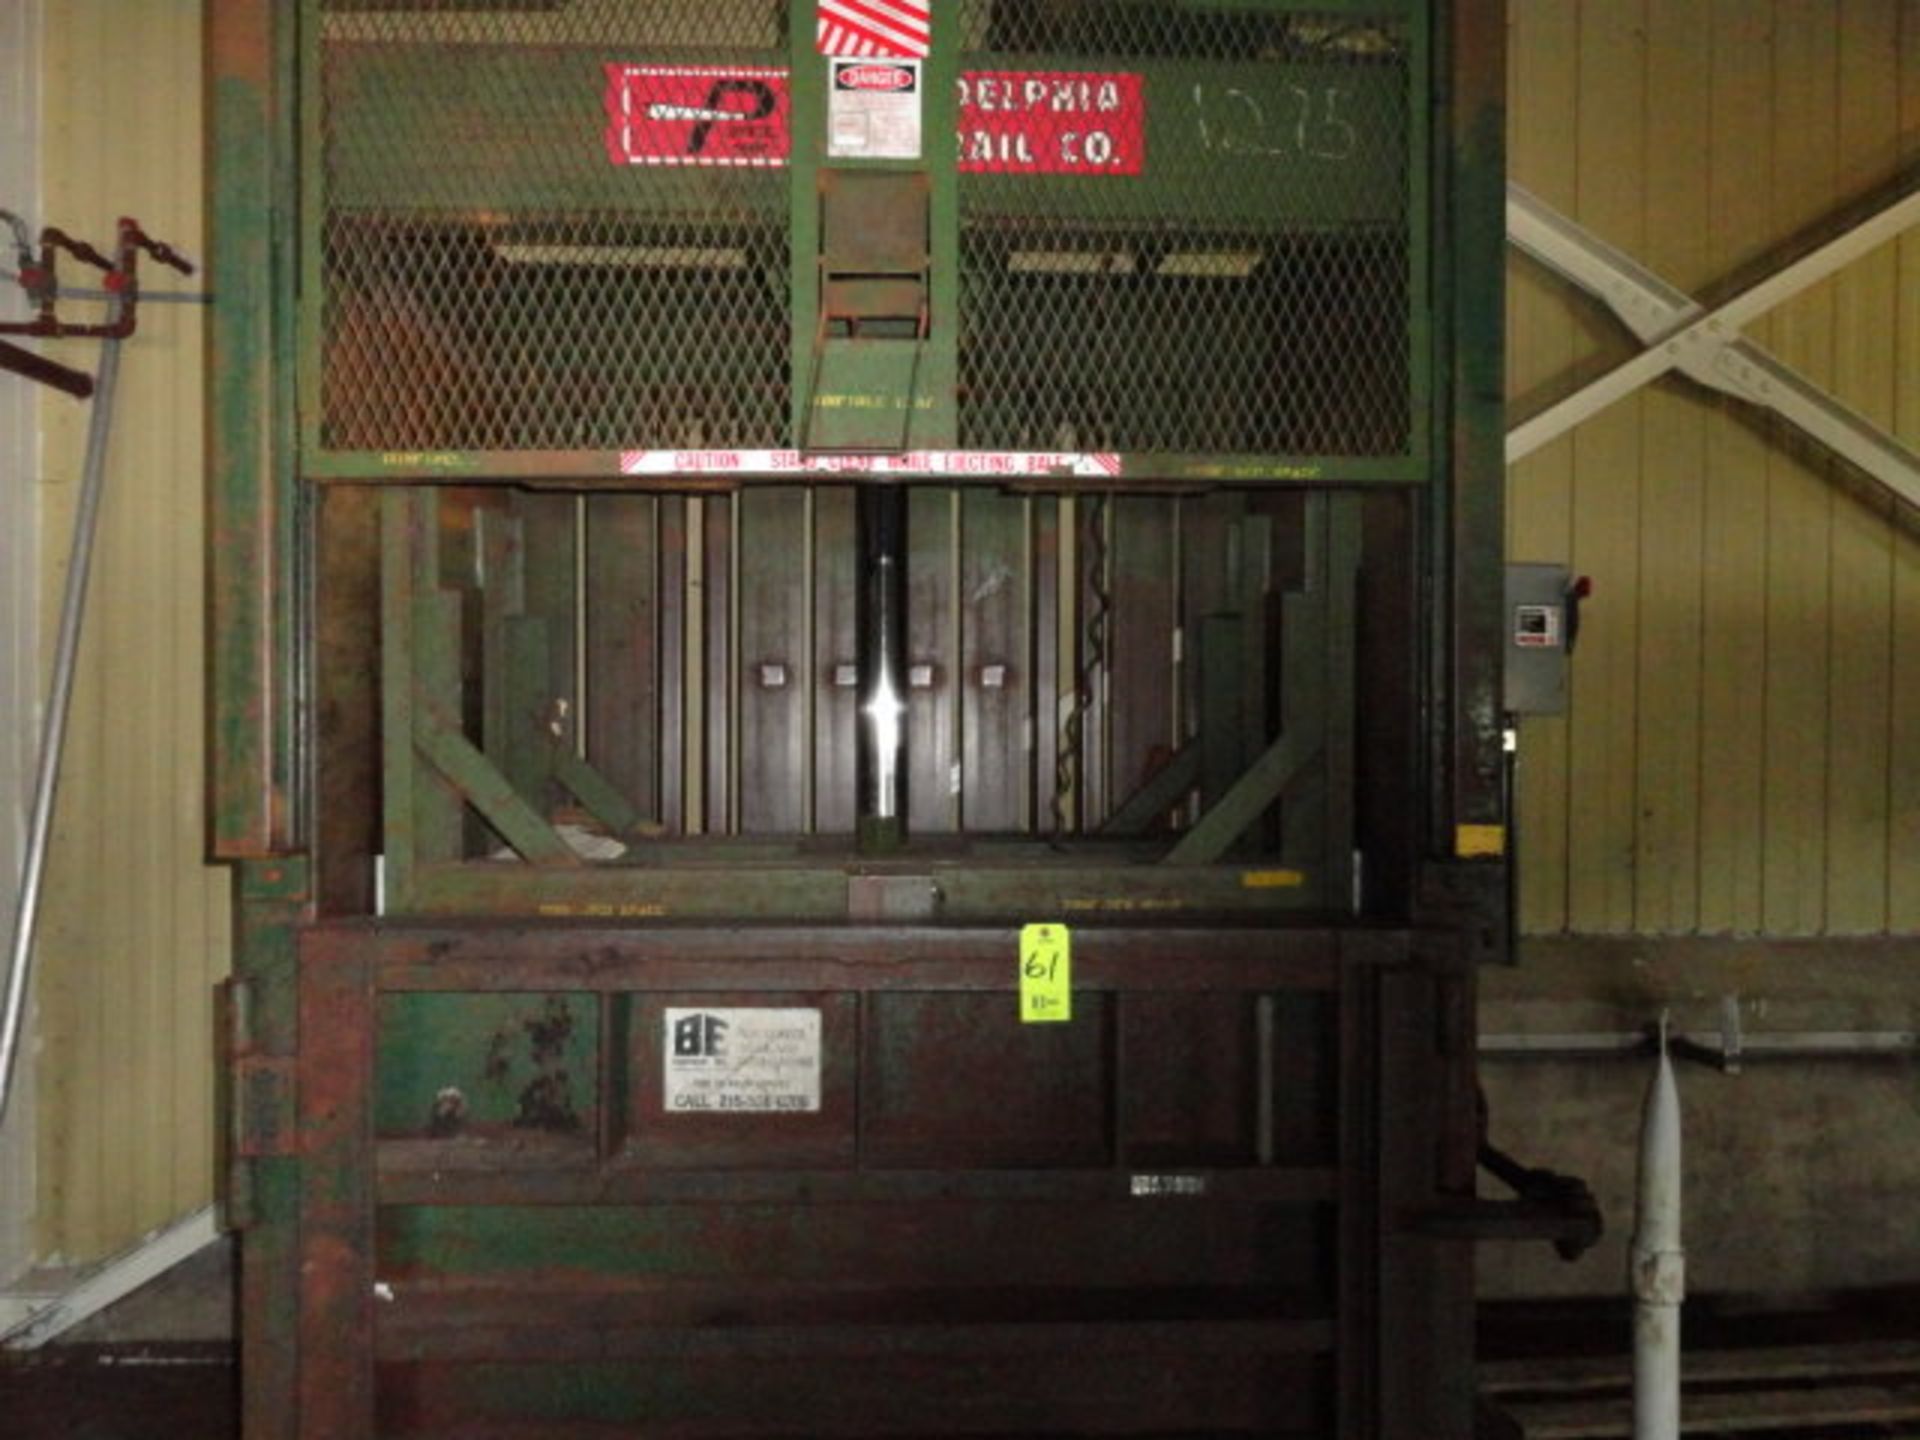 Philadelphia Tramrail Mdl. 3400 Bailer Co. Trash Compactor, self-contained hydraulic compactor, left - Image 3 of 4